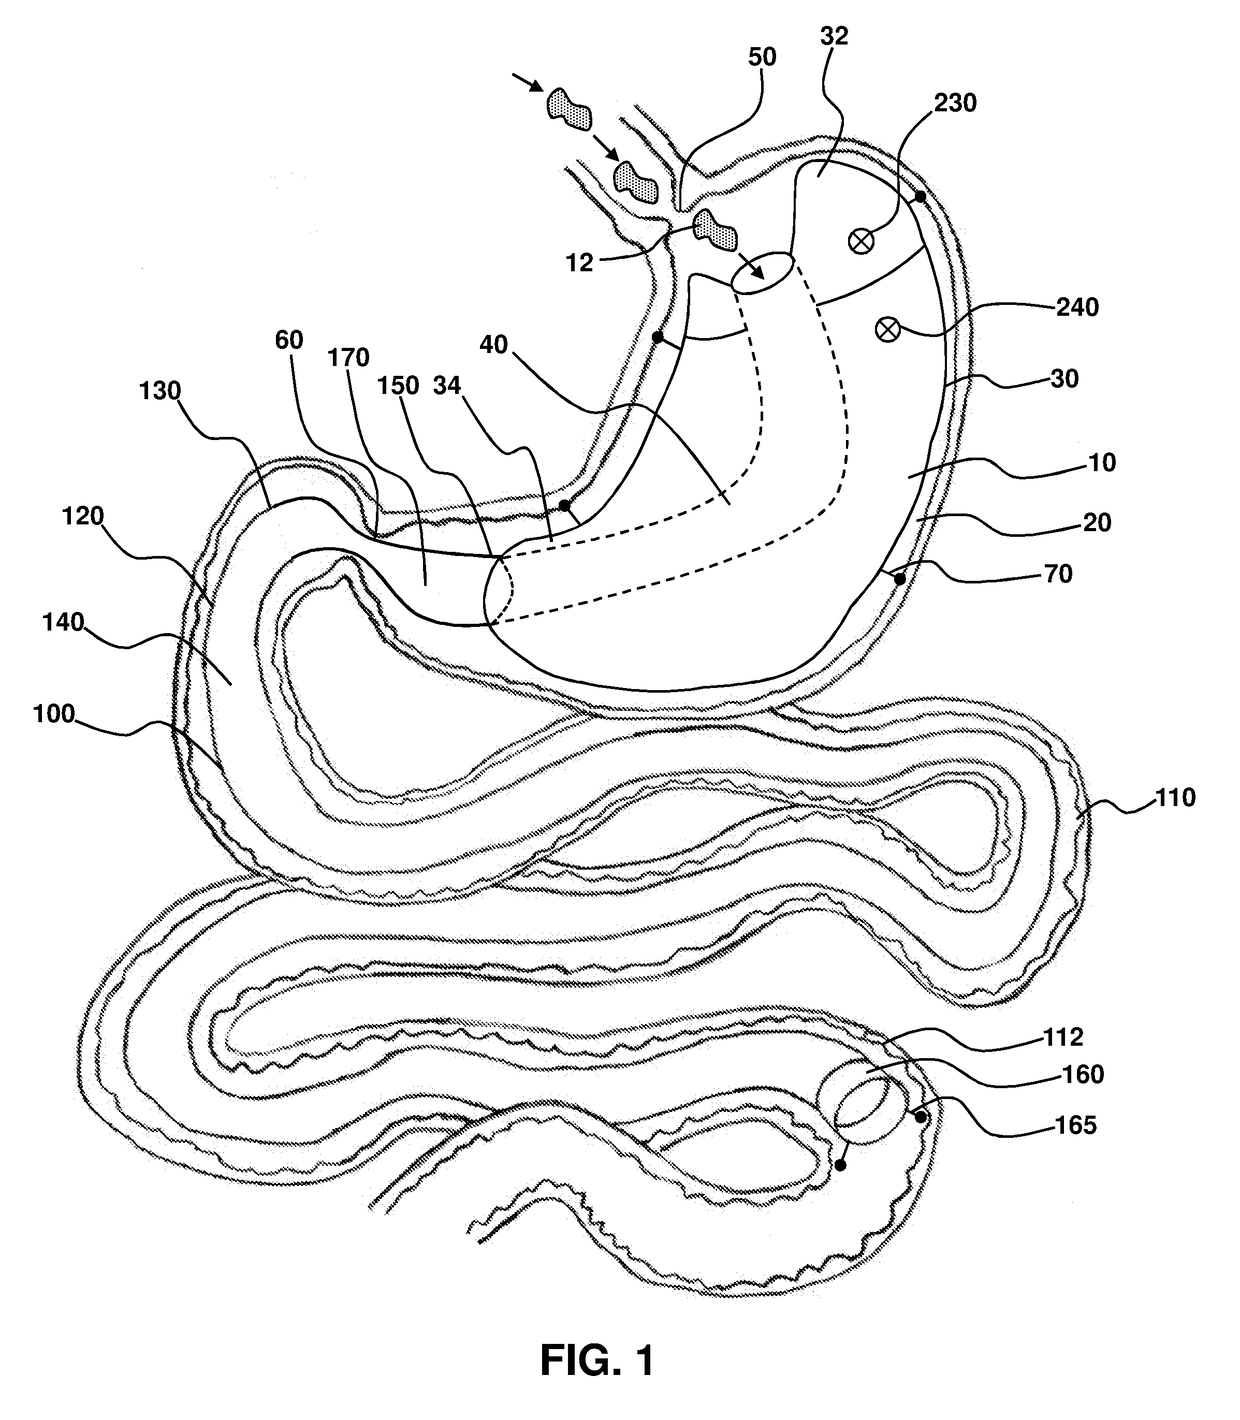 Sleeve-anchorable gastric balloon for weight loss